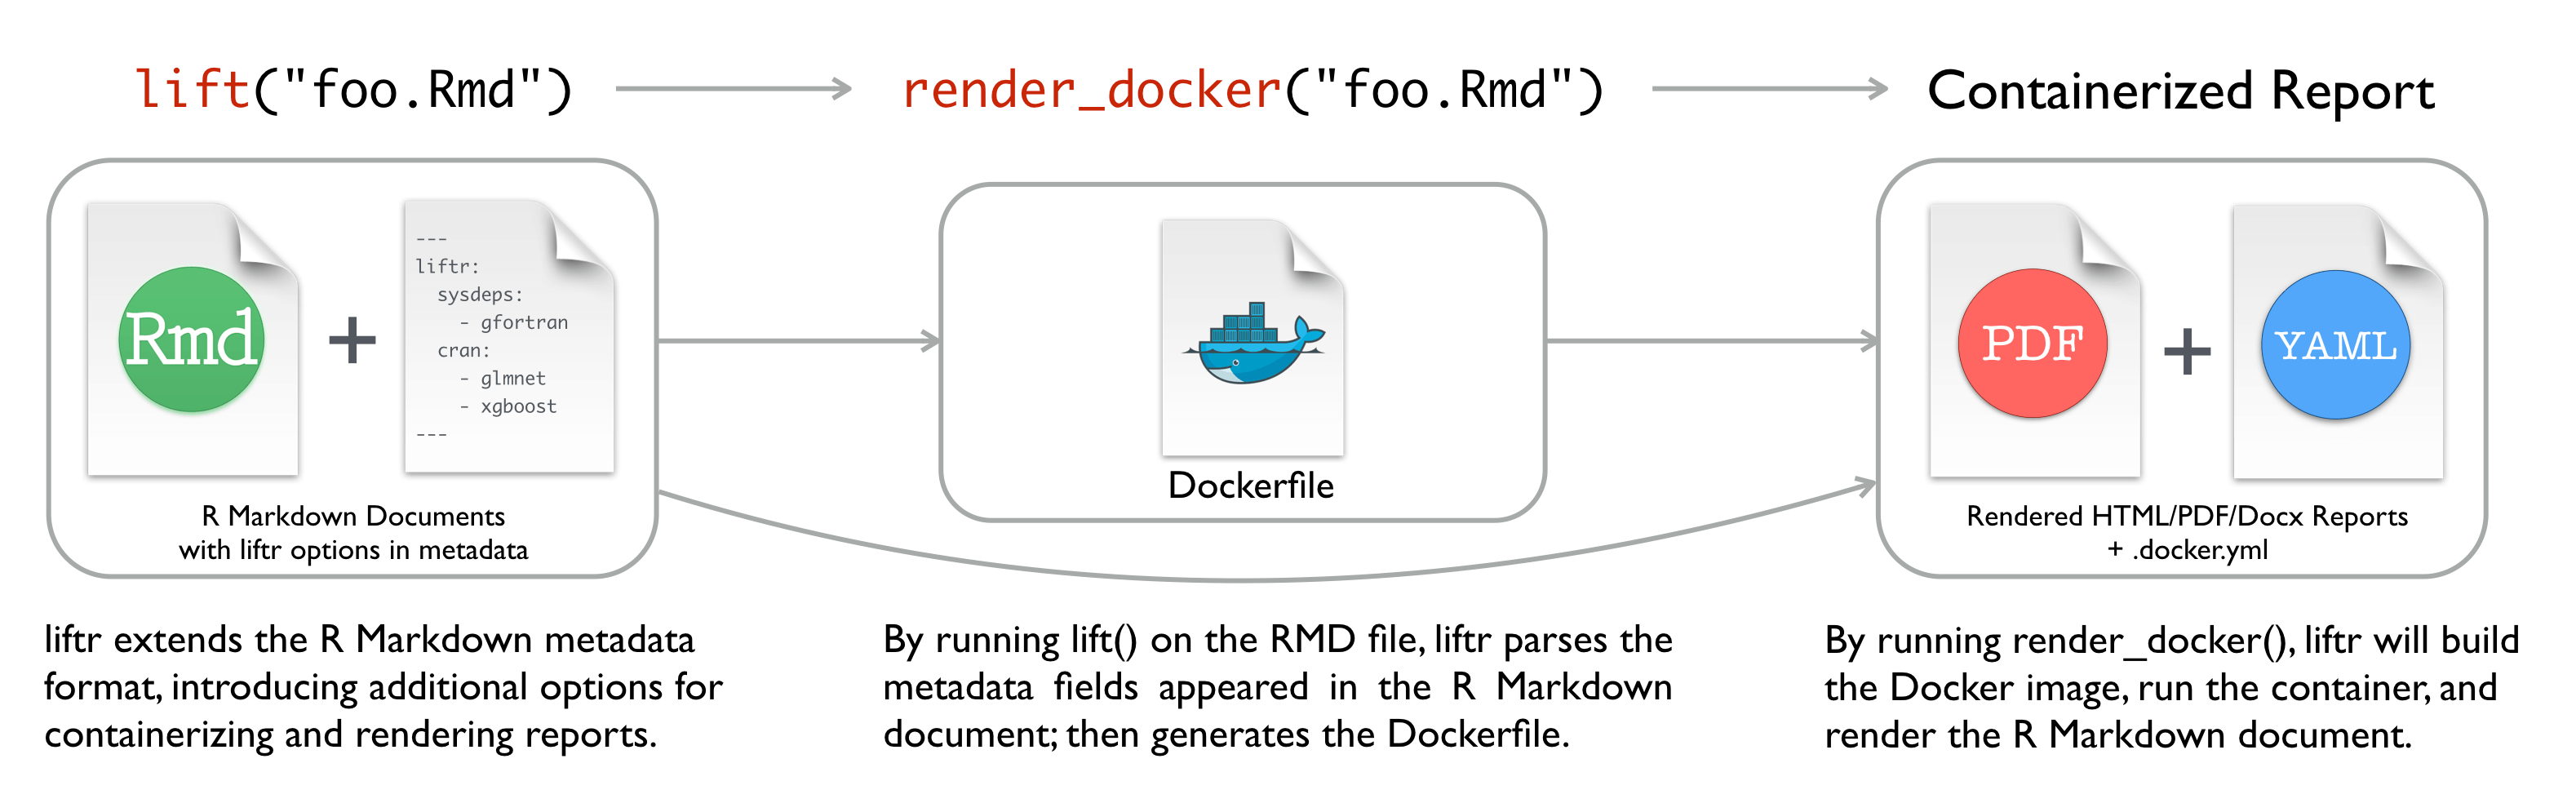 Containerize R Markdown Documents with liftr